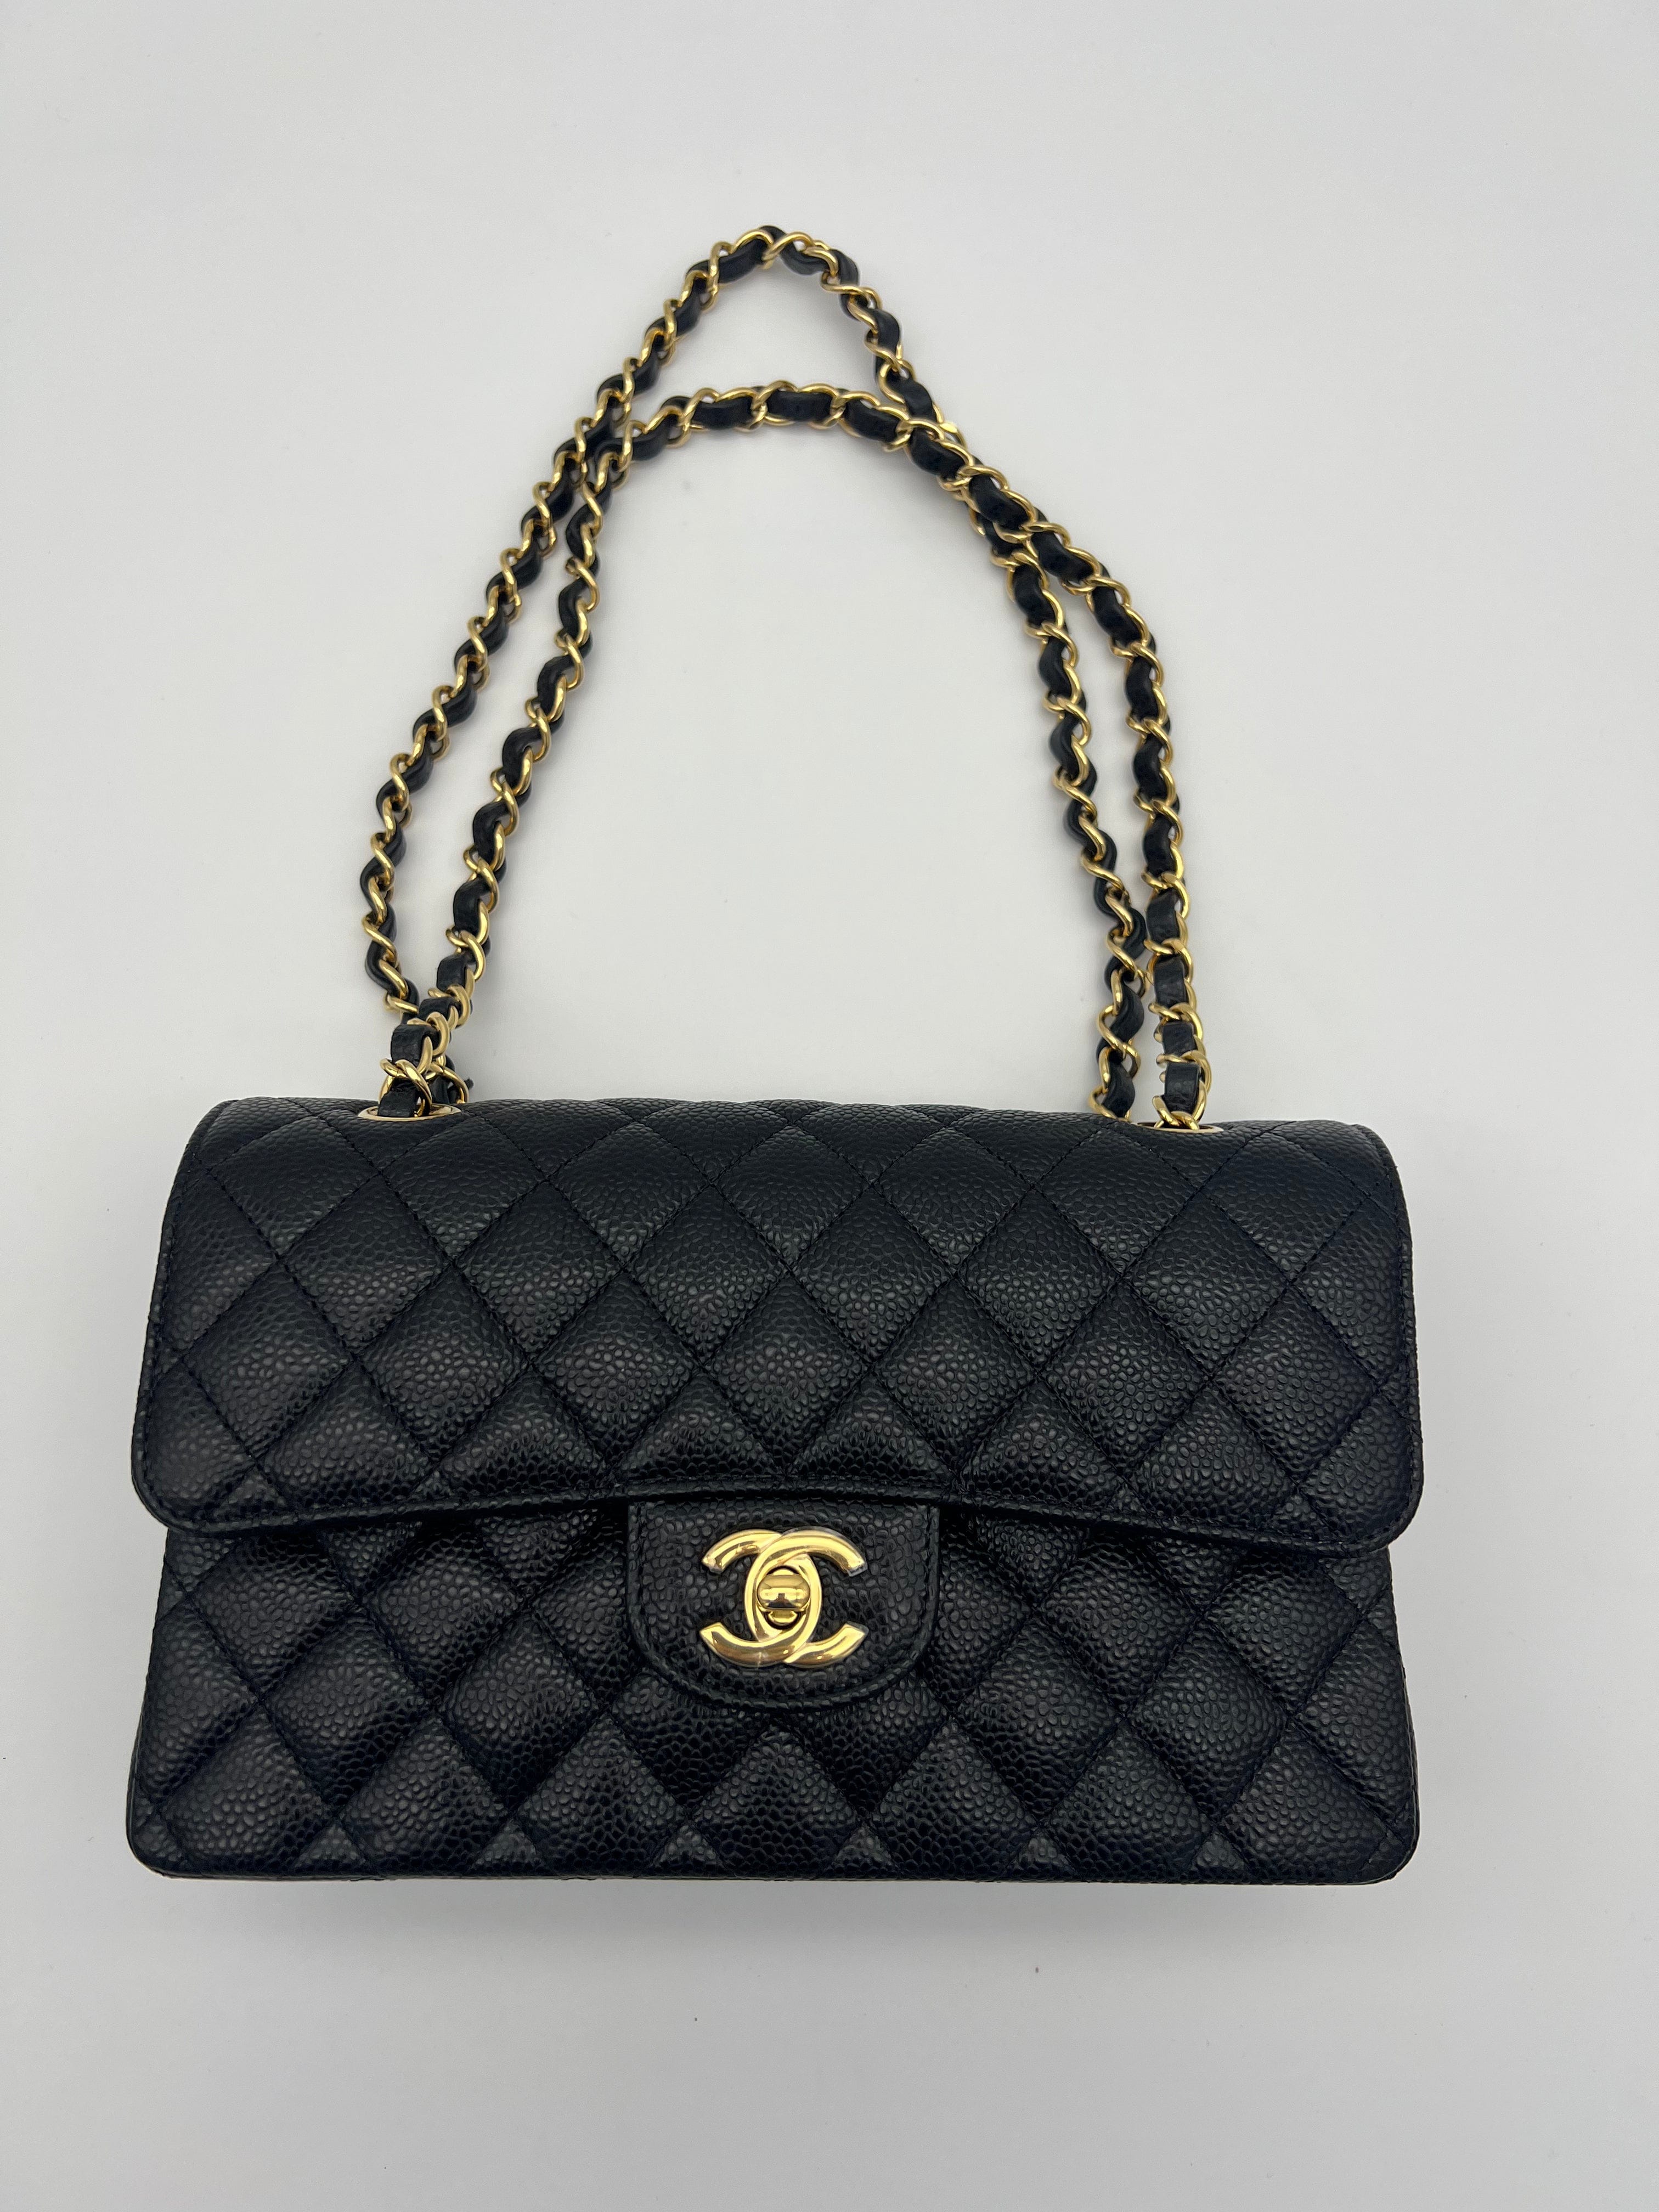 Chanel Chanel Black Caviar Small Leather Flap GHW